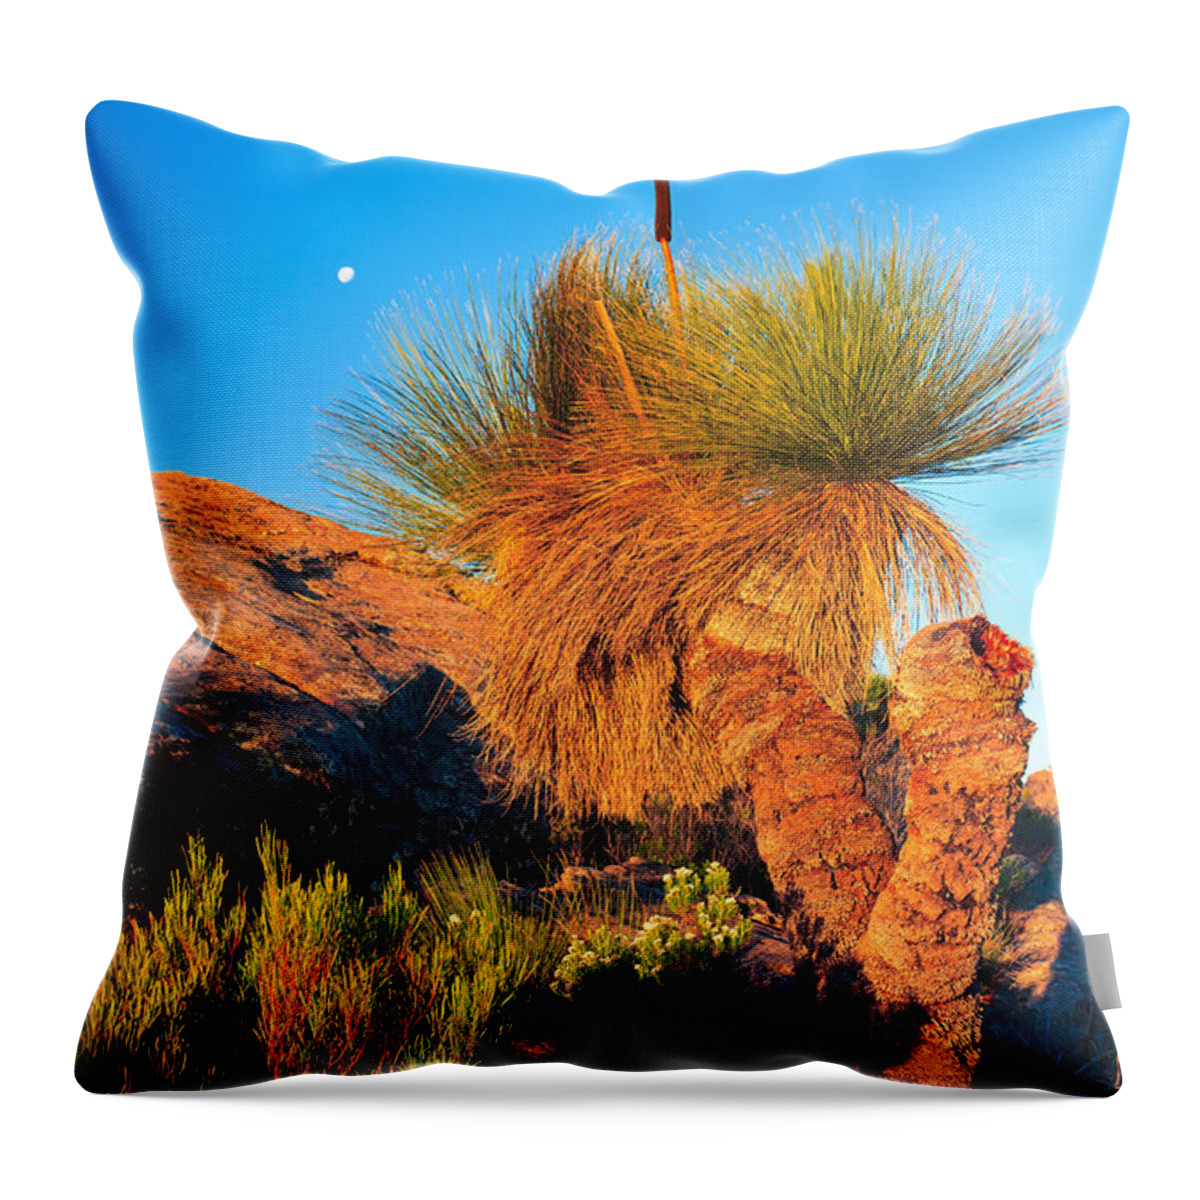 Wilpena Pound St Mary Peak Filinders Ranges South Australia Australain Landscape Landscapes Outback Moon Xanthorhoea Throw Pillow featuring the photograph Wilpena Pound #8 by Bill Robinson